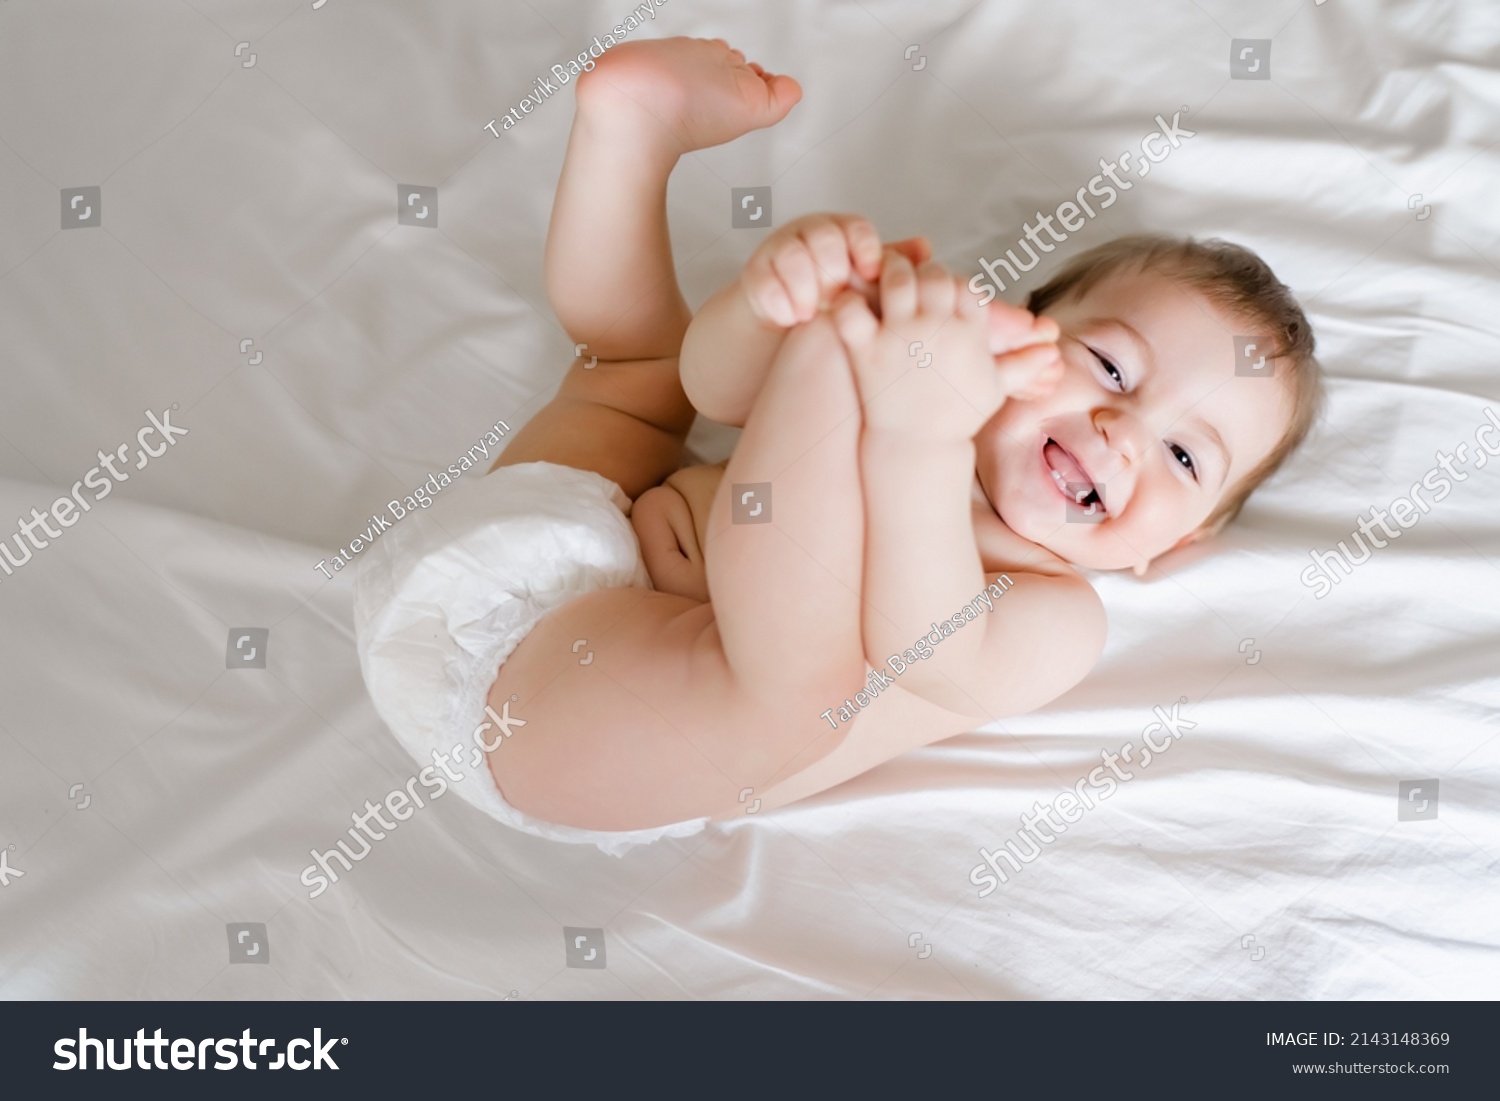 happy joyful baby in diapers lying on white bed #2143148369